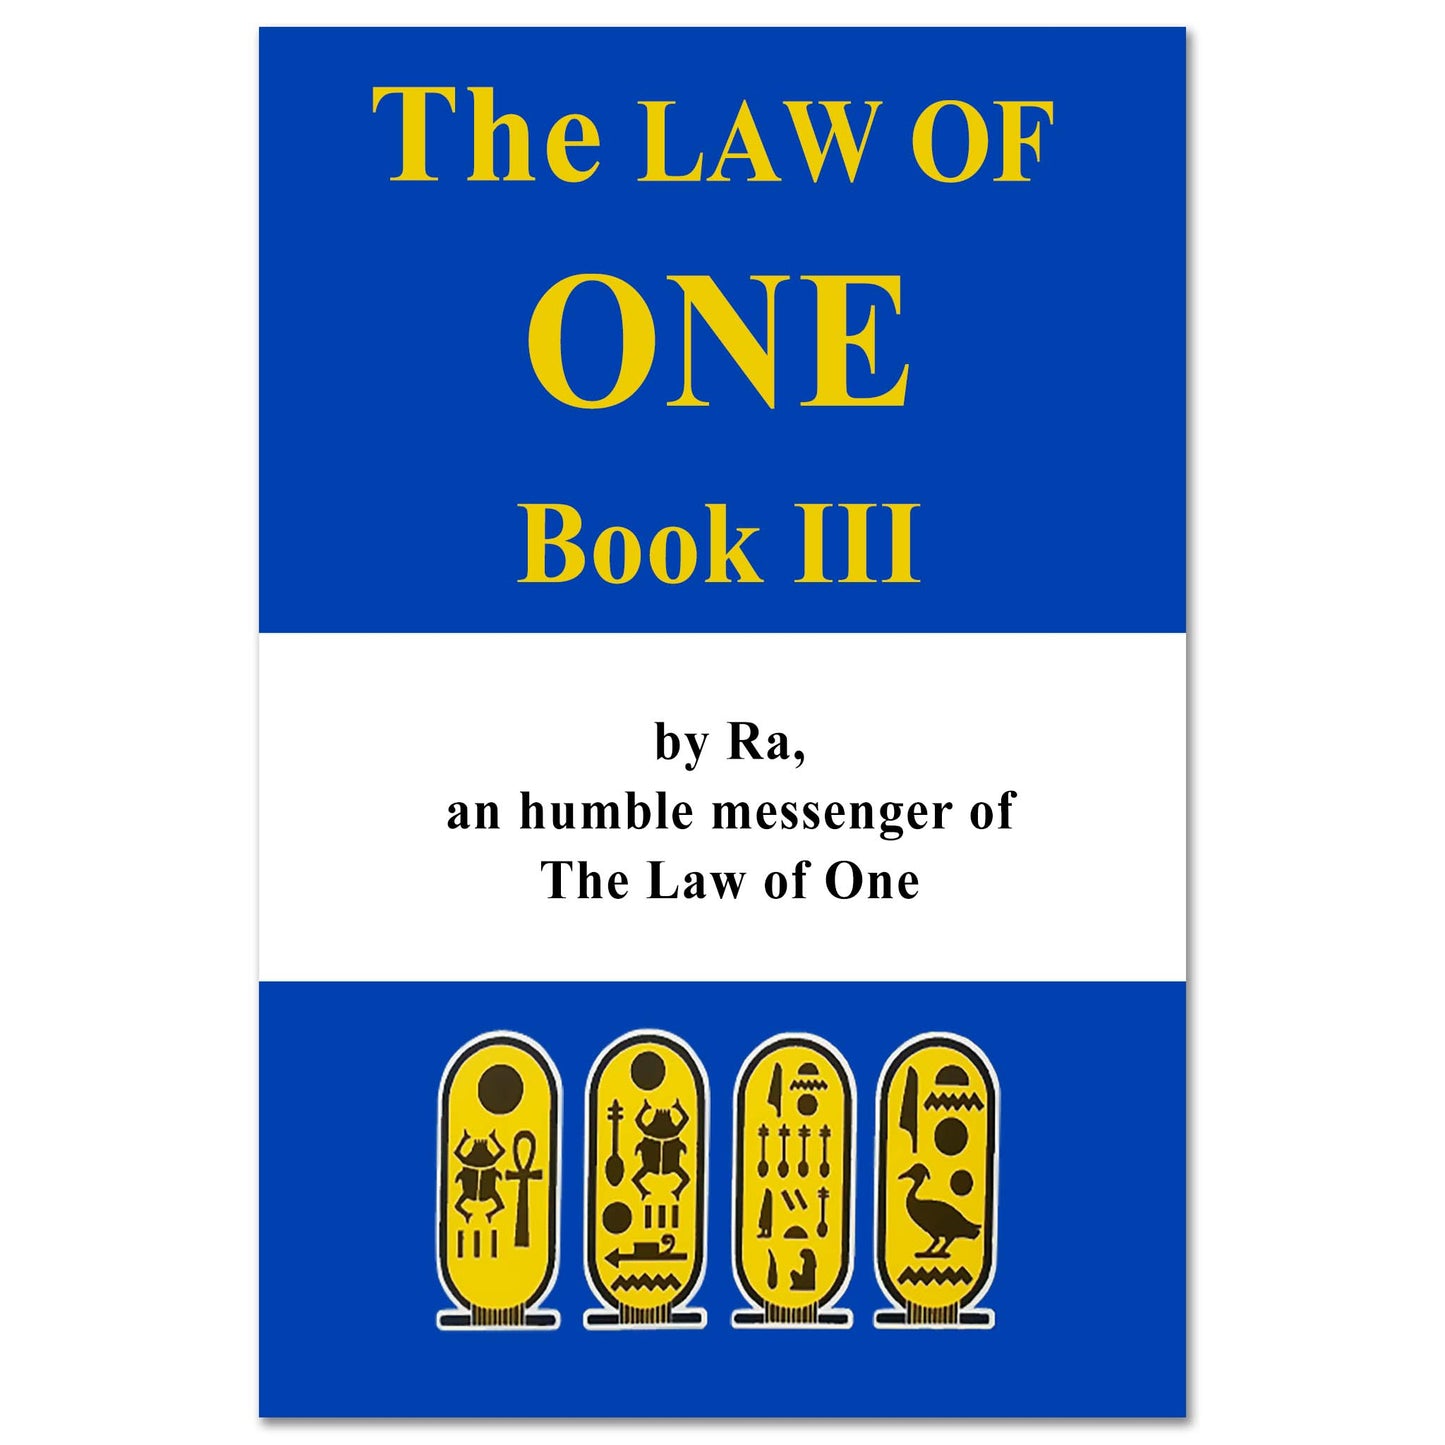 The Law of One: Book III